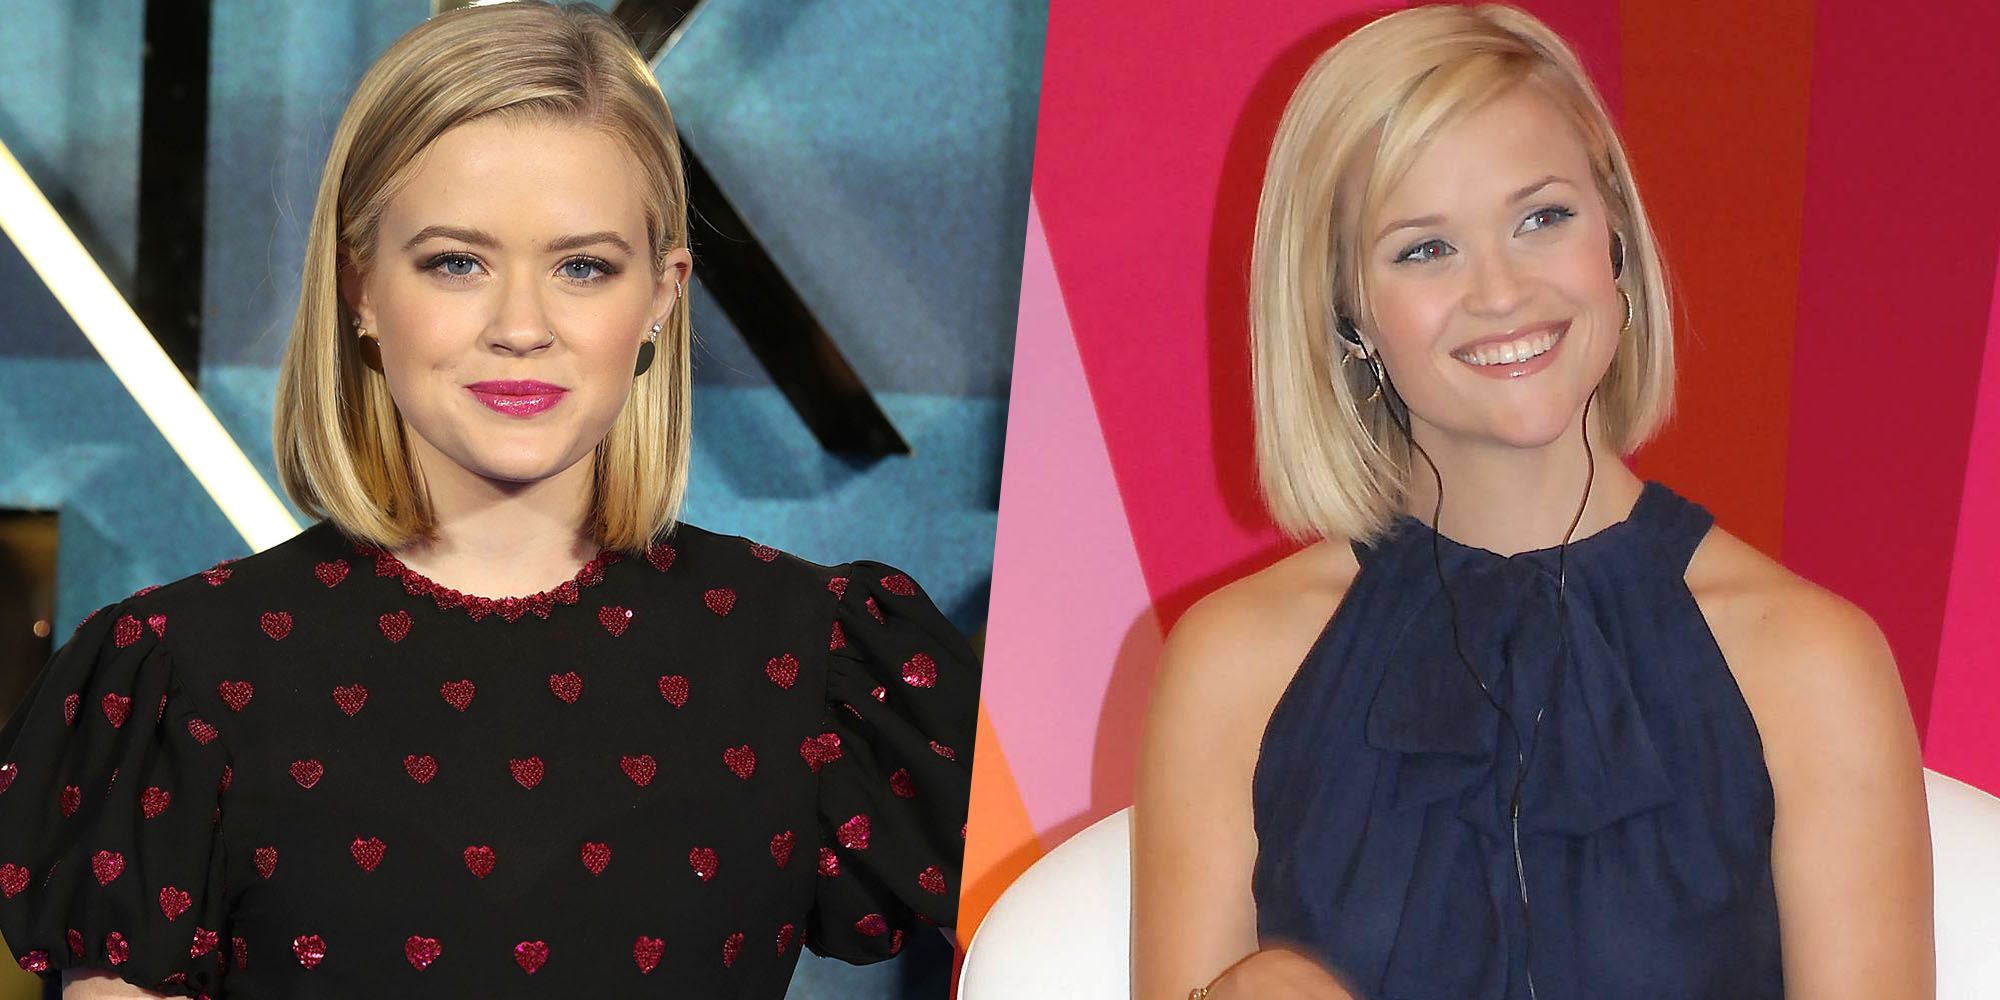 Reese Witherspoon wears her long hair in multitones of blondes